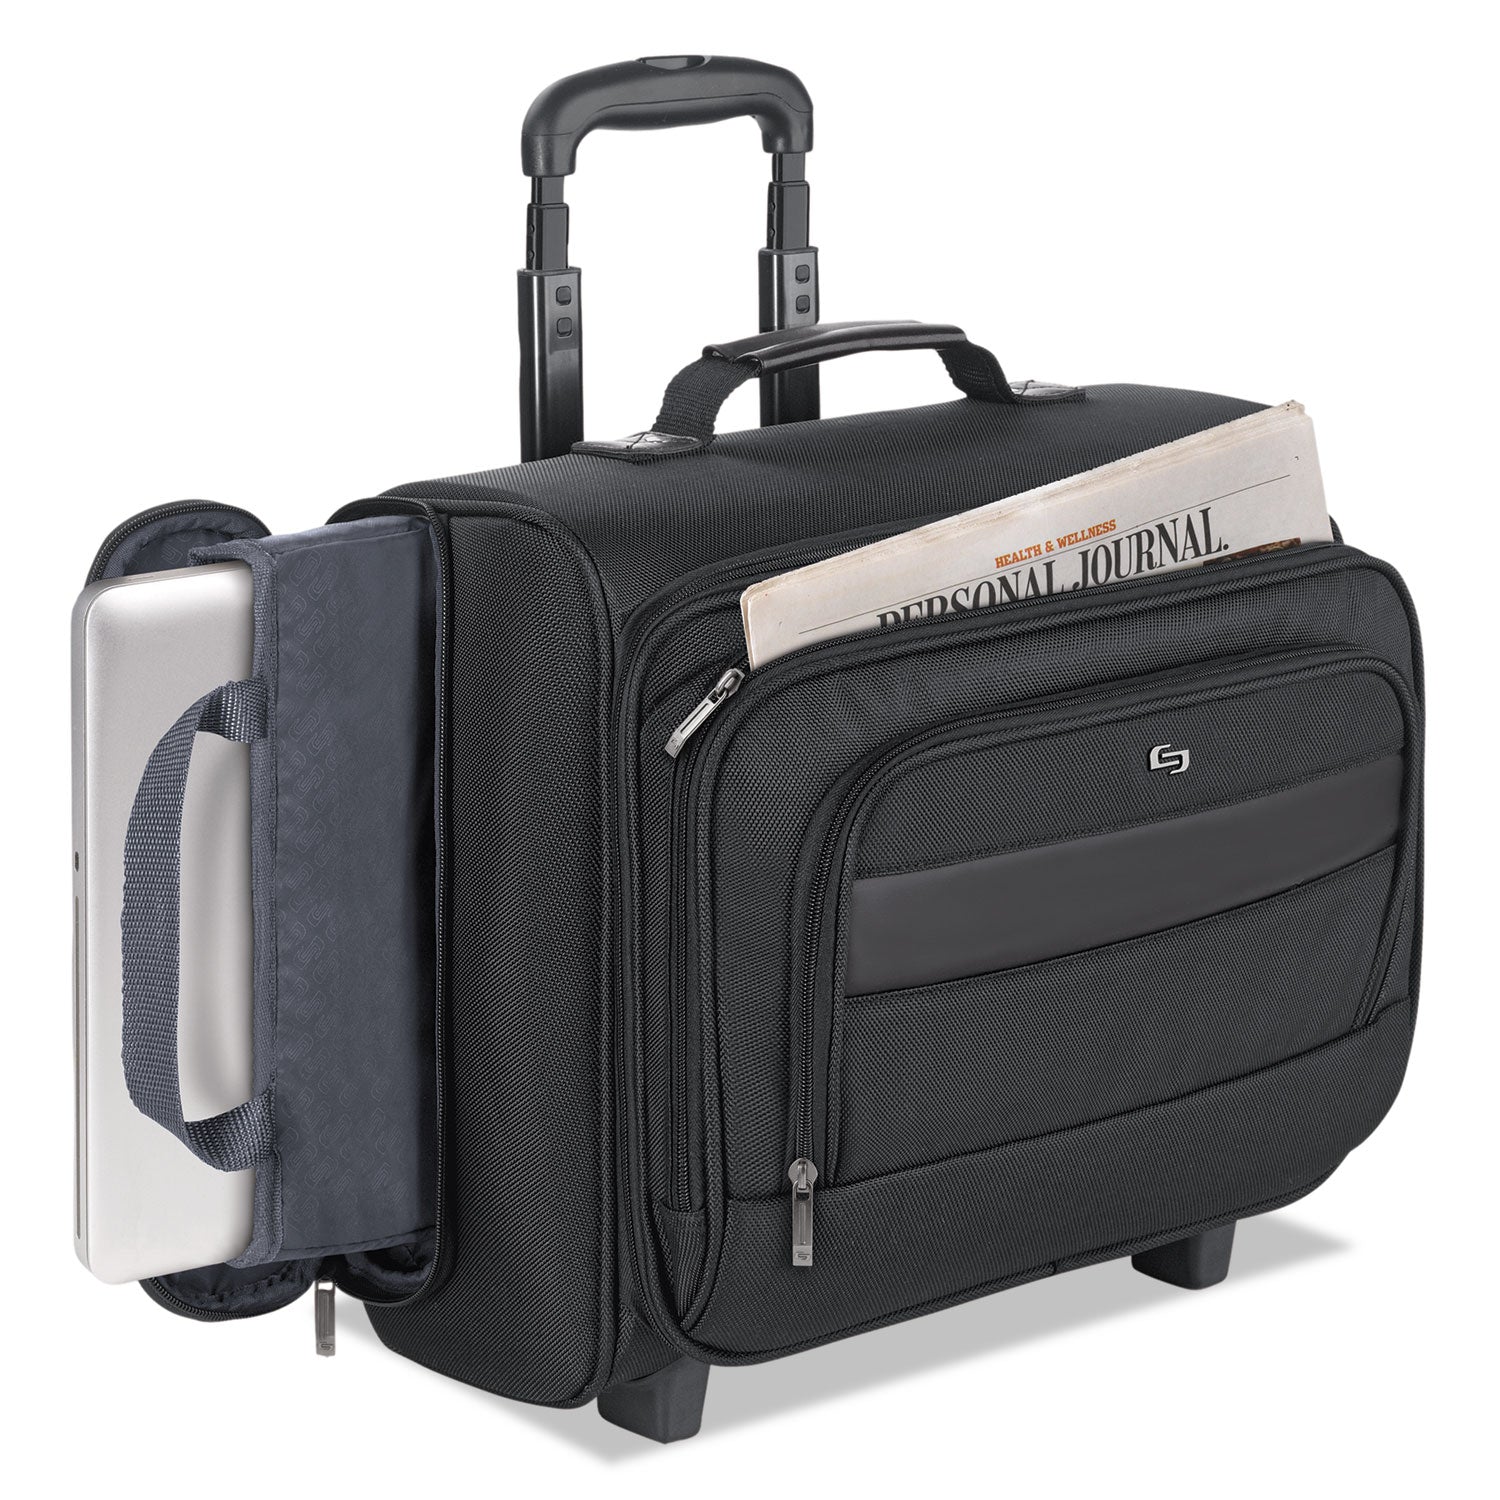 Classic Rolling Overnighter Case, Fits Devices Up to 15.6", Ballistic Polyester, 16.14 x 6.69 x 13.78, Black - 